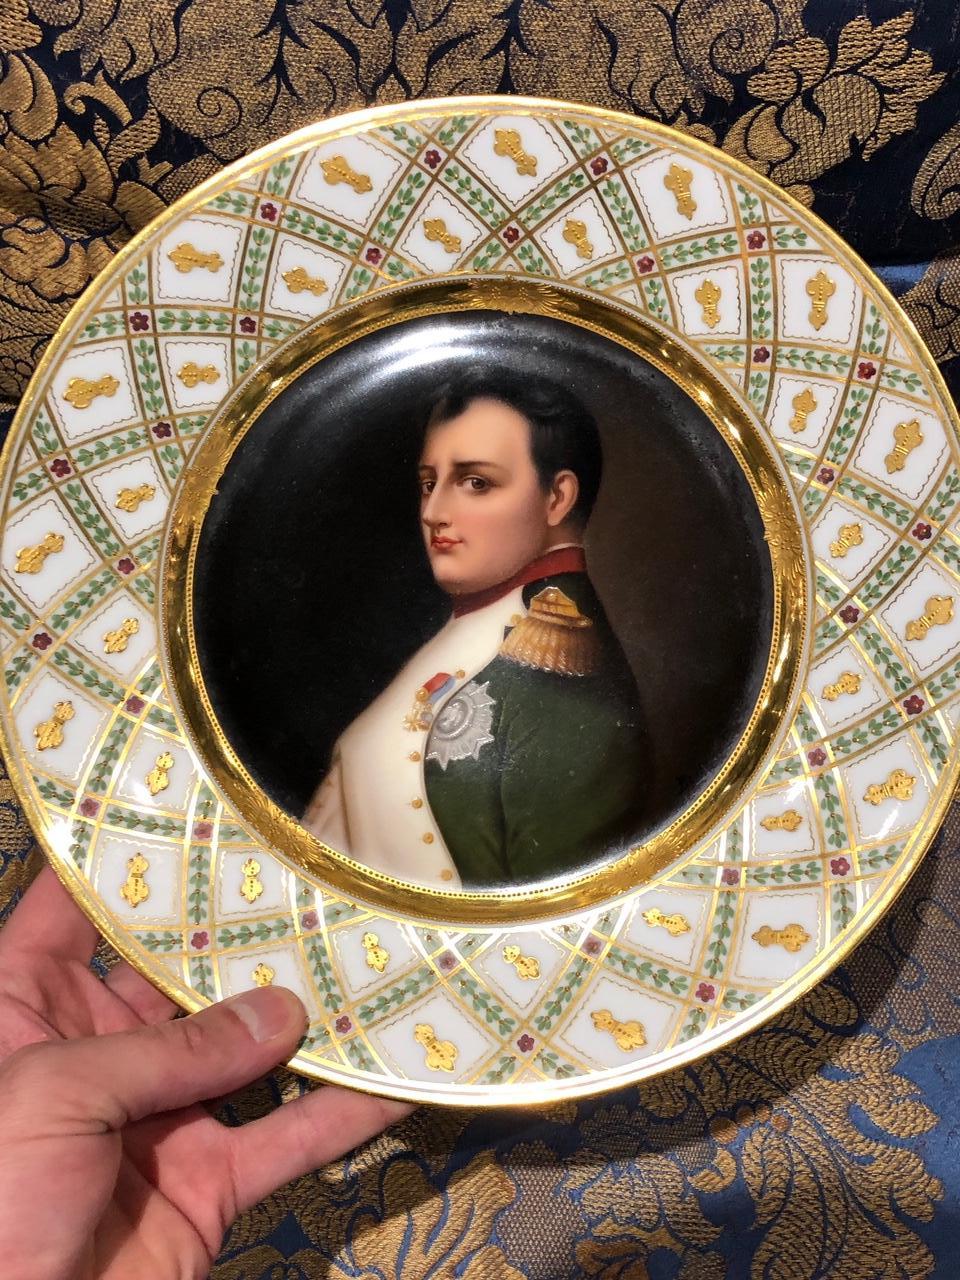 Exceptional Antique hand painted Vienna porcelain plate with raised gold border of Napoleon

Signed Bork

Beautiful painted with portrait of Napoleon Excellent quality.

Mint condition. No chips, cracks, repairs.

10” diameter.